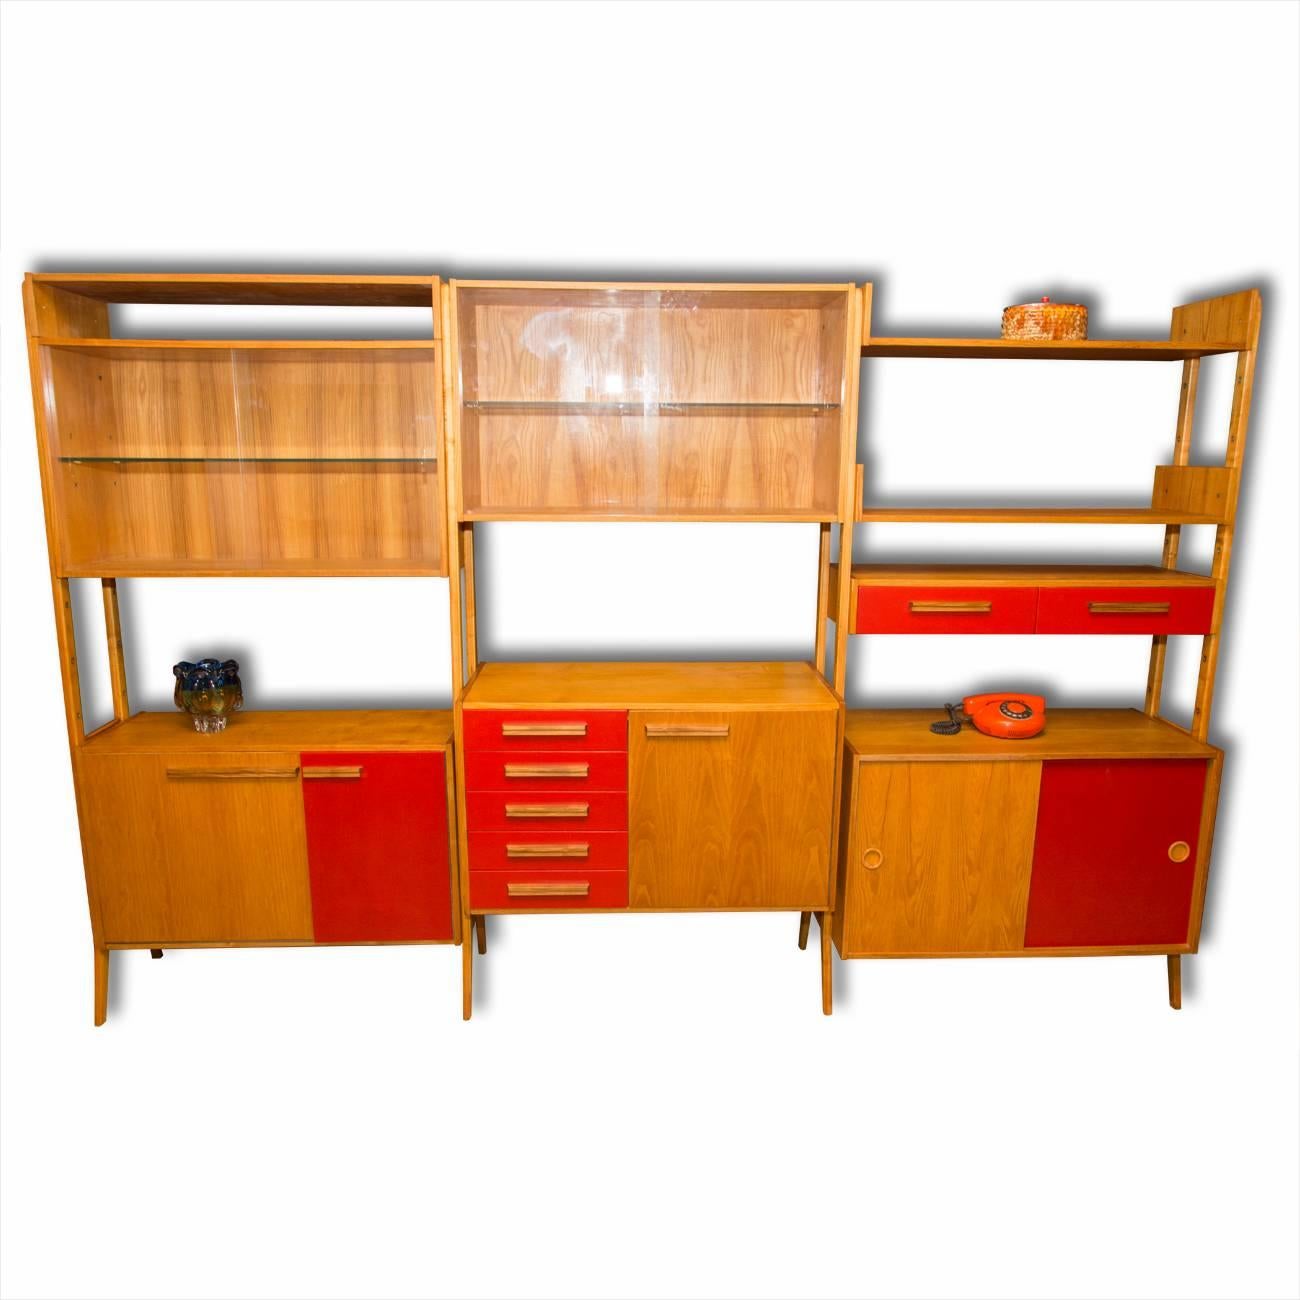 This is a midcentury Czechoslovak modernist beech unit shelf system by Frantisek Jirak for Tatra nabytok. It was made in Czechoslovakia during the 1960s. The system is made of beech, plywood and has colorful parts. In excellent condition.